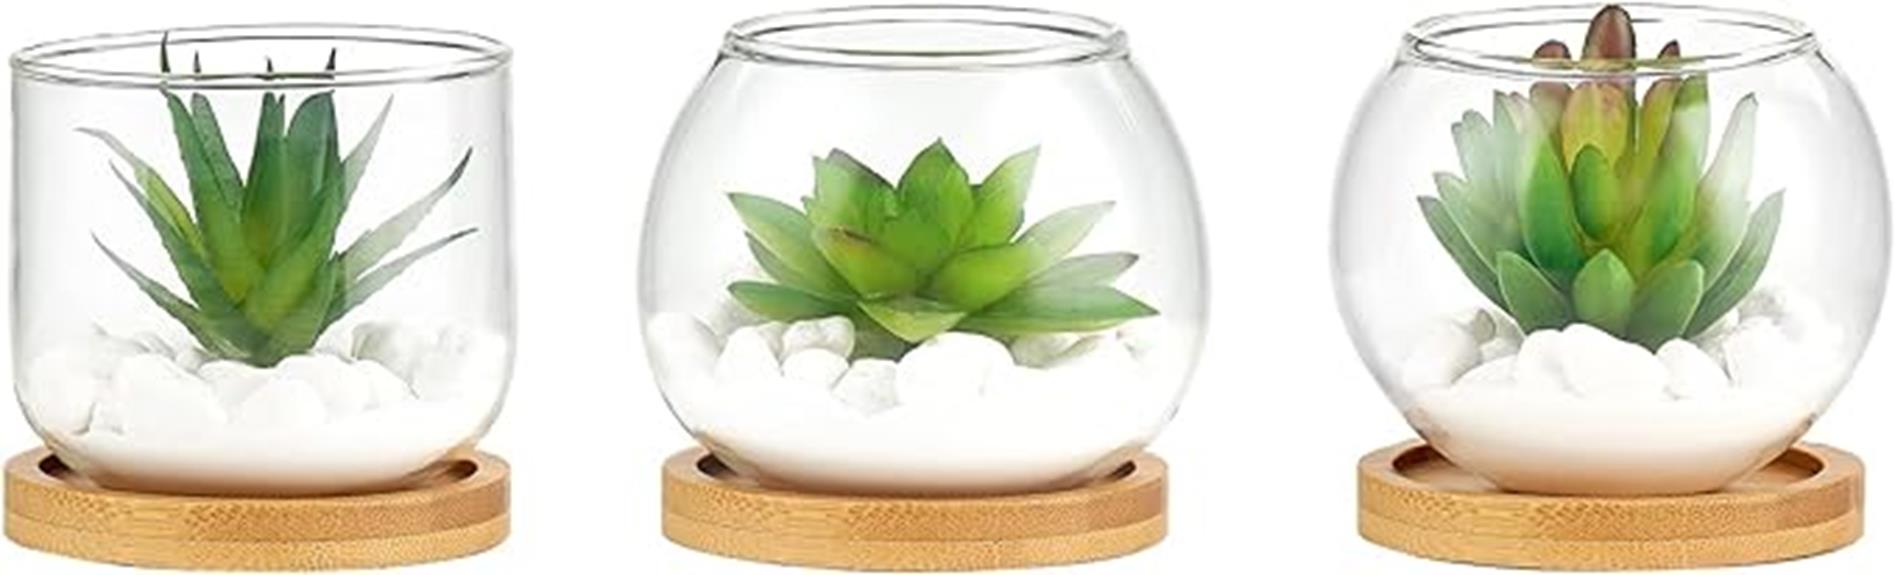 artificial succulents in glass